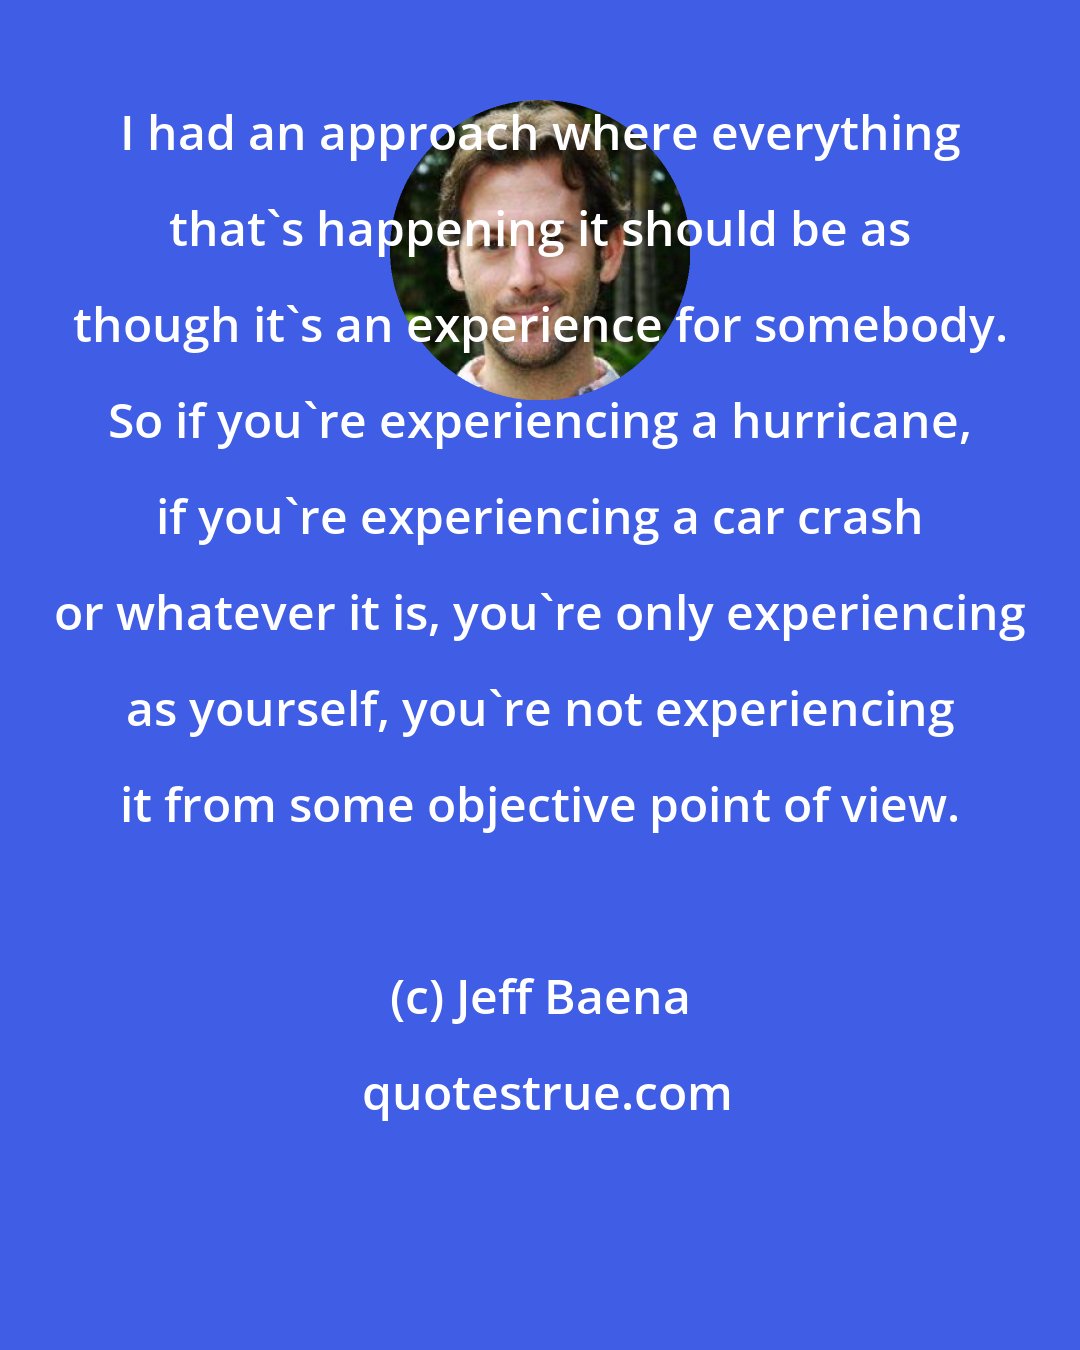 Jeff Baena: I had an approach where everything that's happening it should be as though it's an experience for somebody. So if you're experiencing a hurricane, if you're experiencing a car crash or whatever it is, you're only experiencing as yourself, you're not experiencing it from some objective point of view.